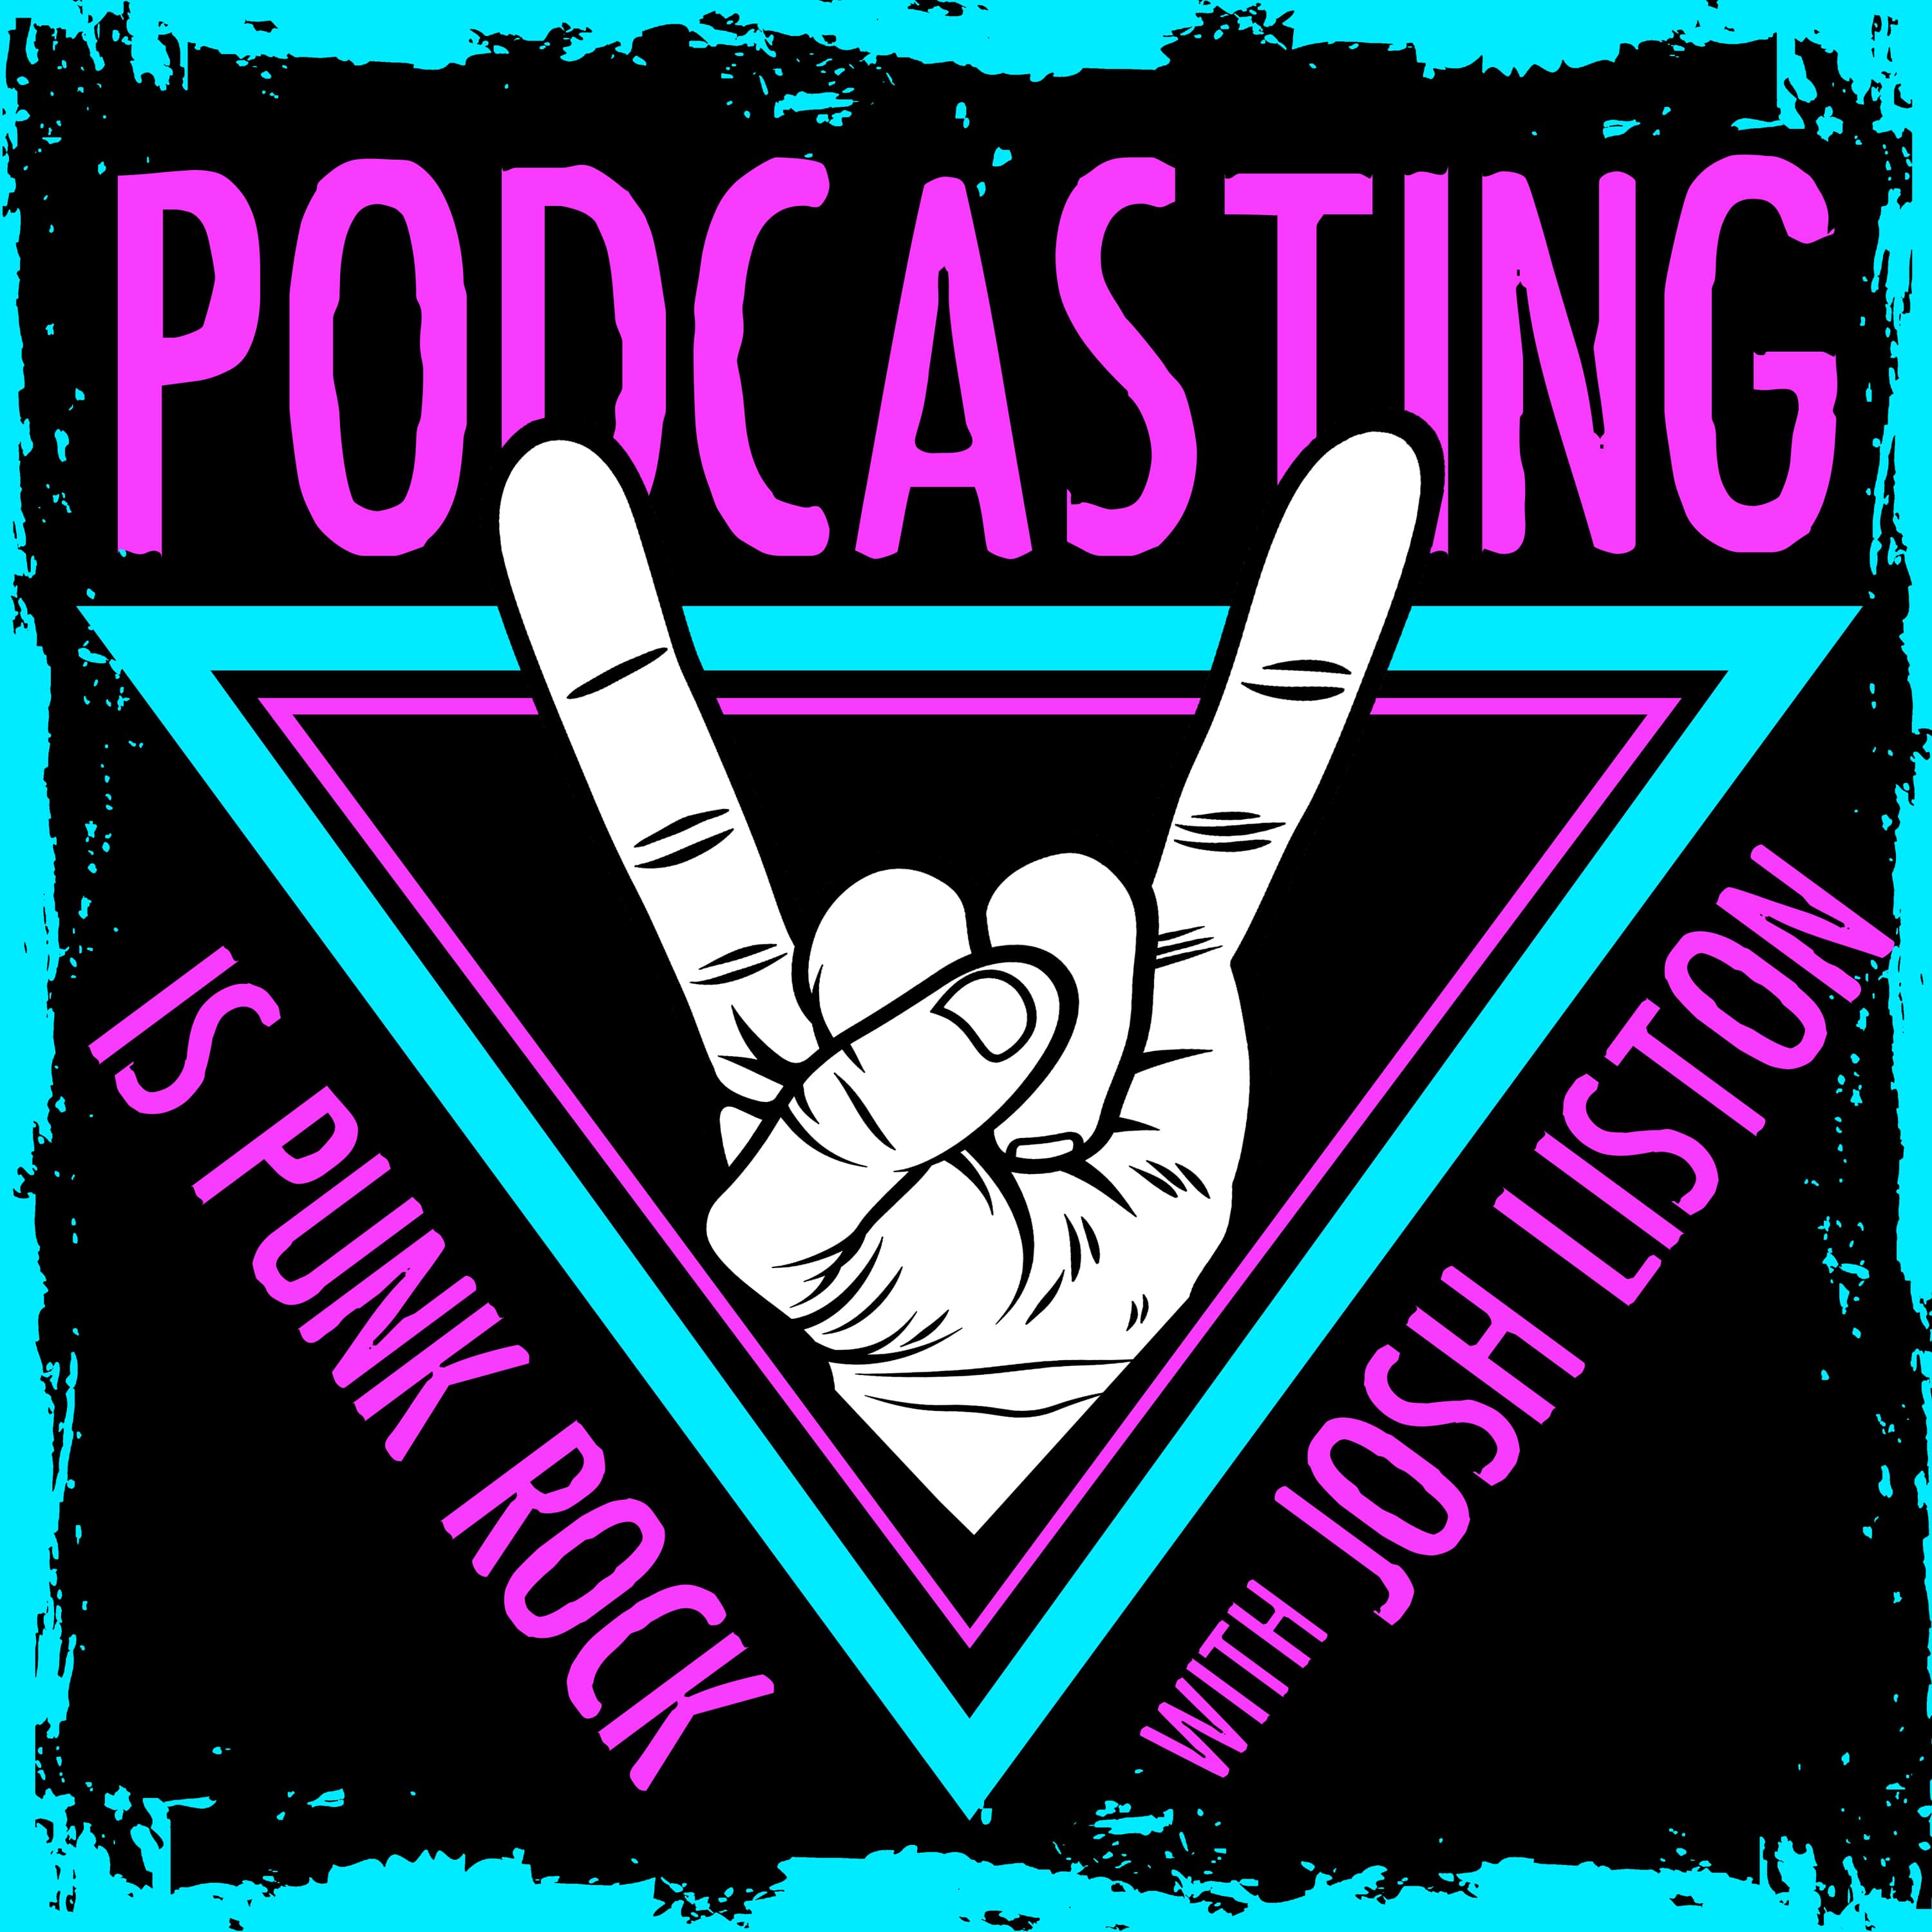 Show artwork for Podcasting Is Punk Rock